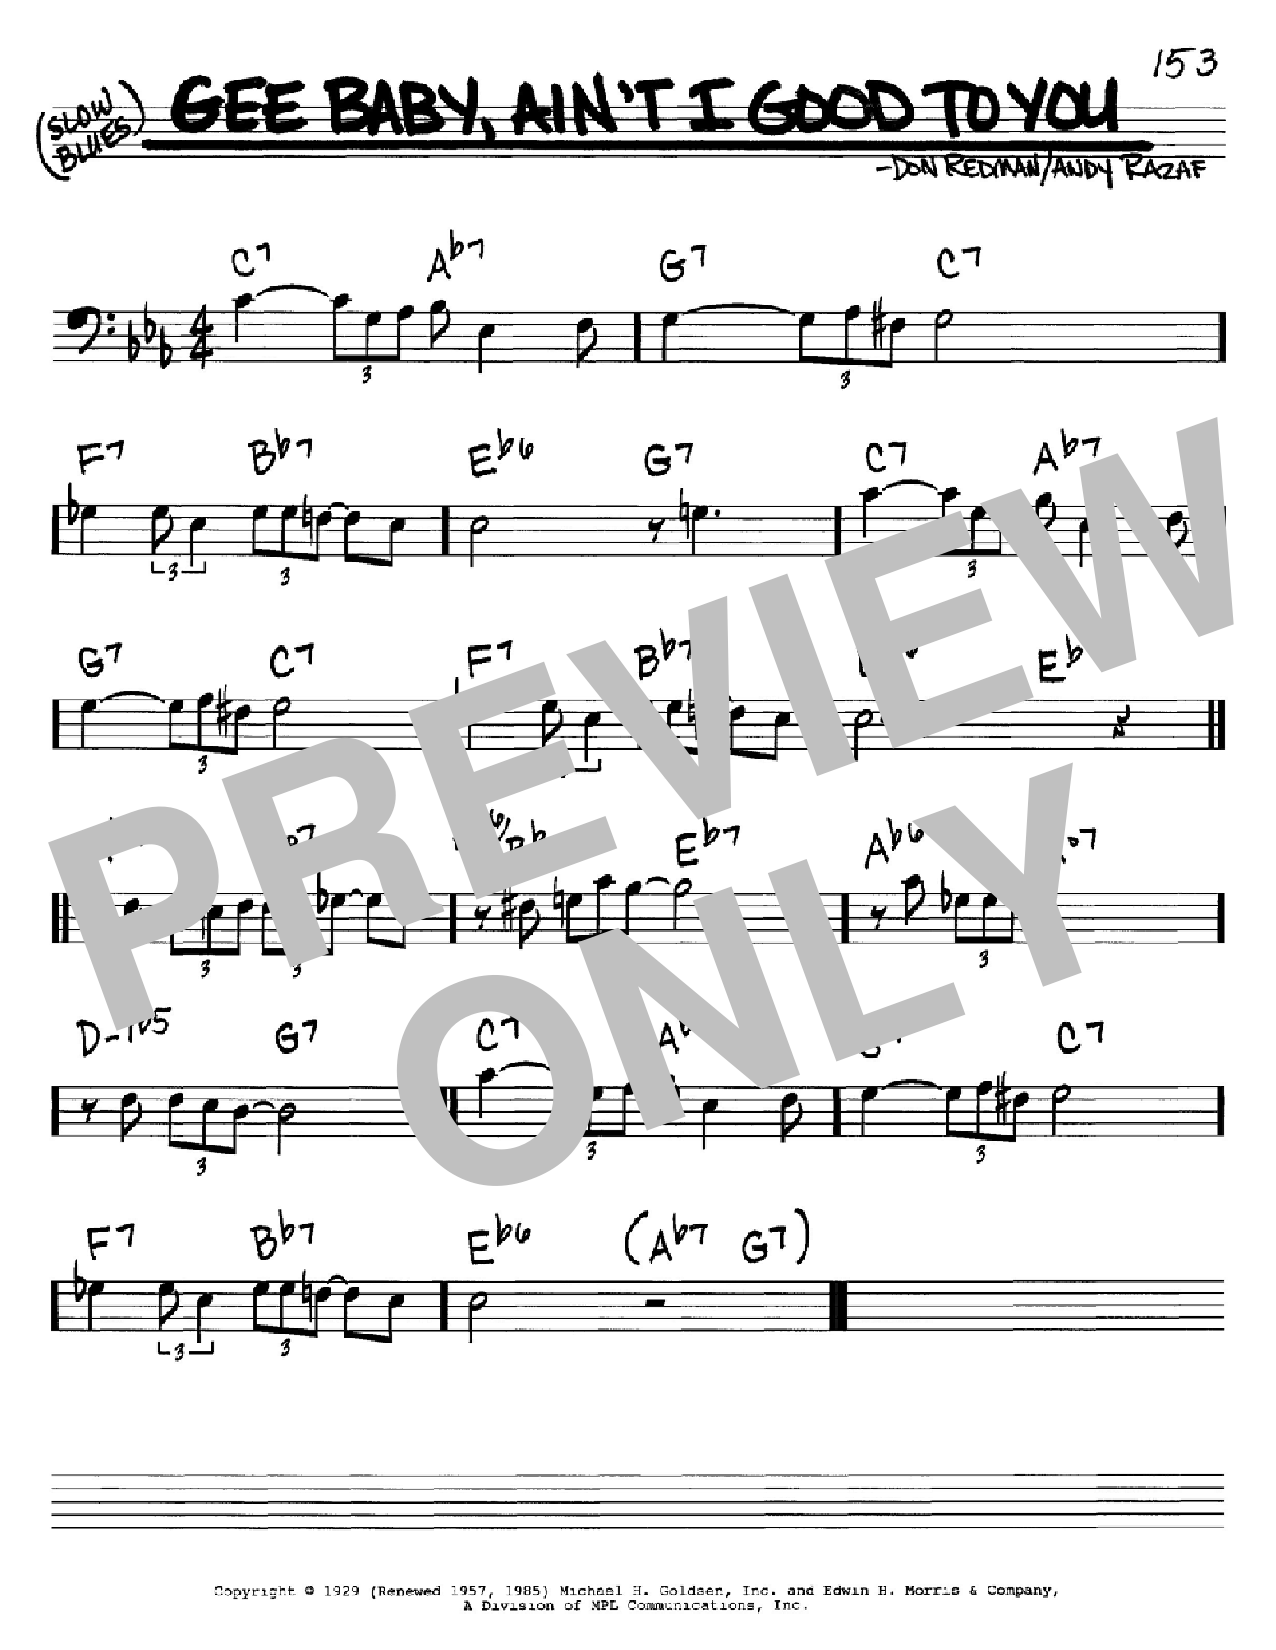 Download Don Redman Gee Baby, Ain't I Good To You Sheet Music